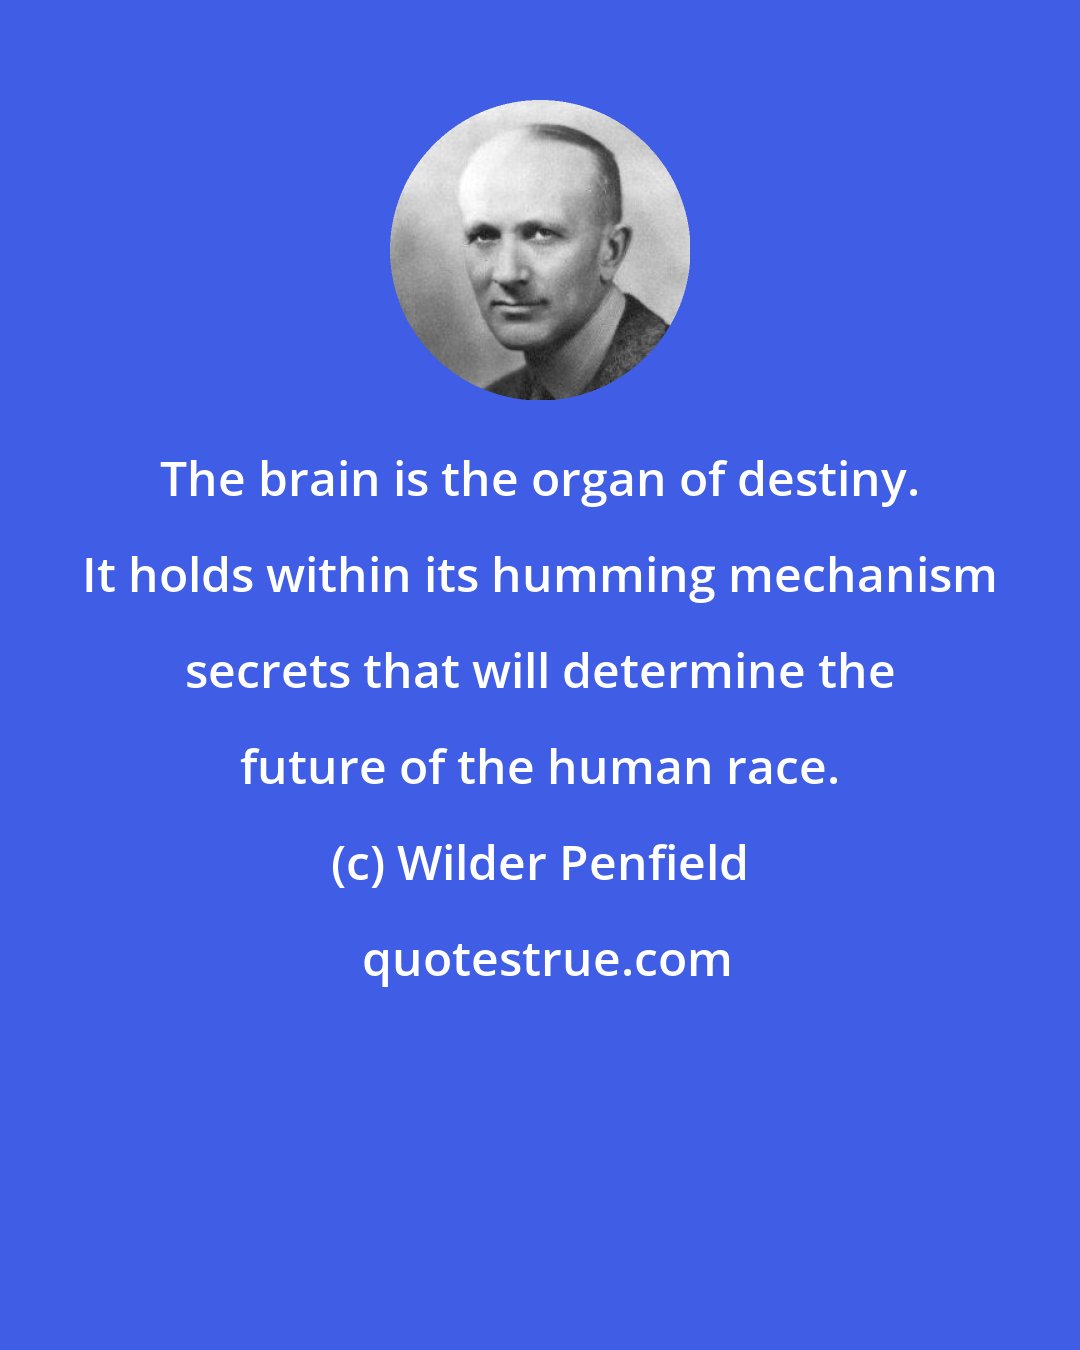 Wilder Penfield: The brain is the organ of destiny. It holds within its humming mechanism secrets that will determine the future of the human race.